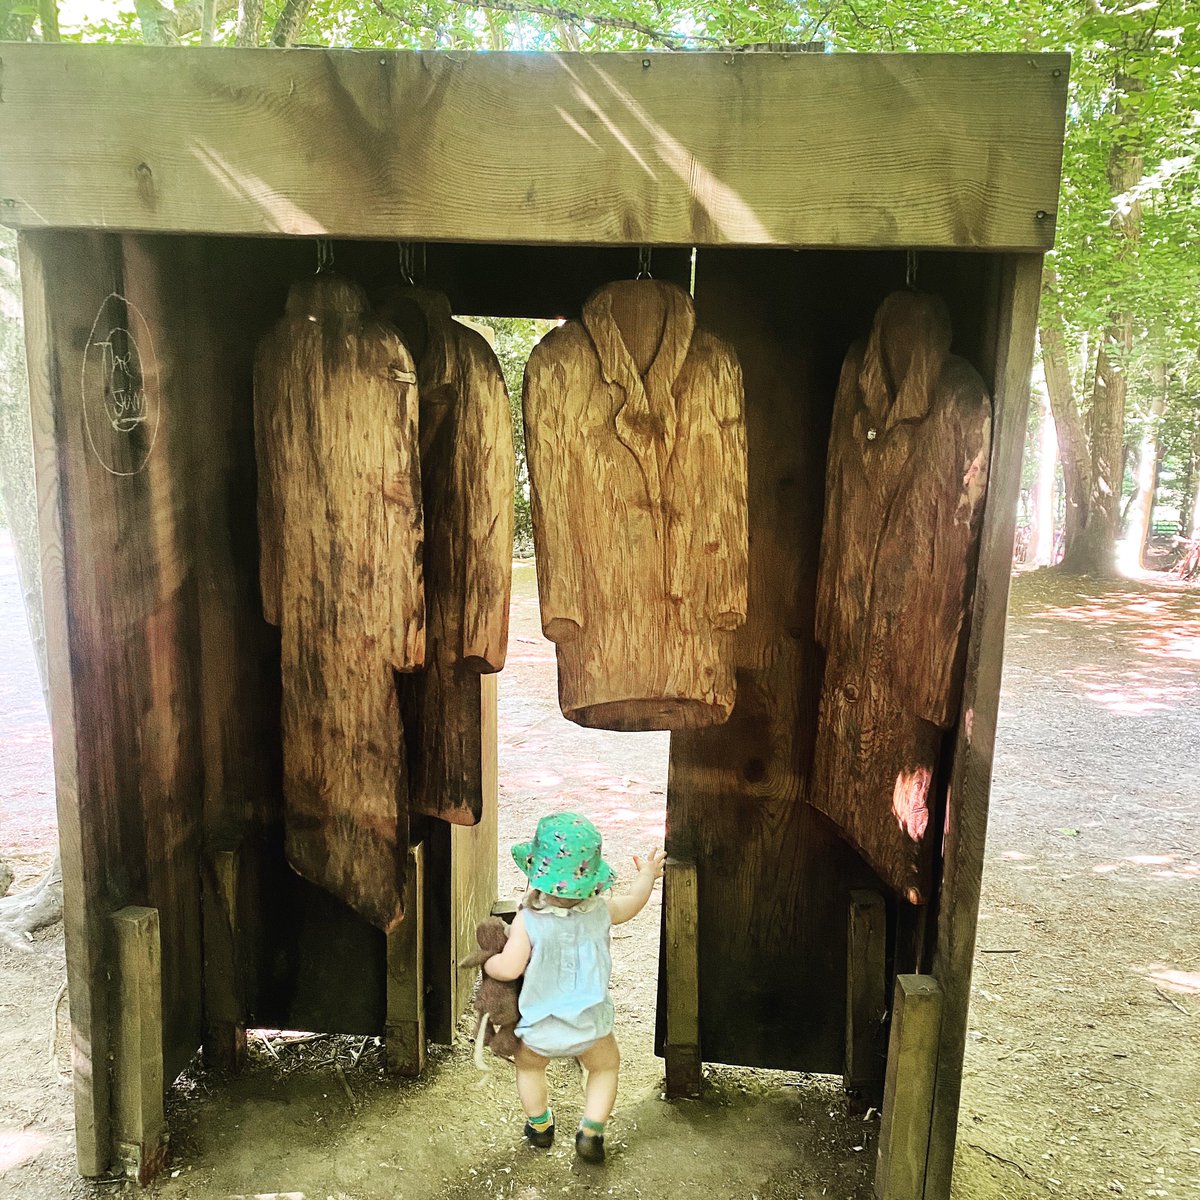 Adventures with our girl  Today, we went to Narnia!